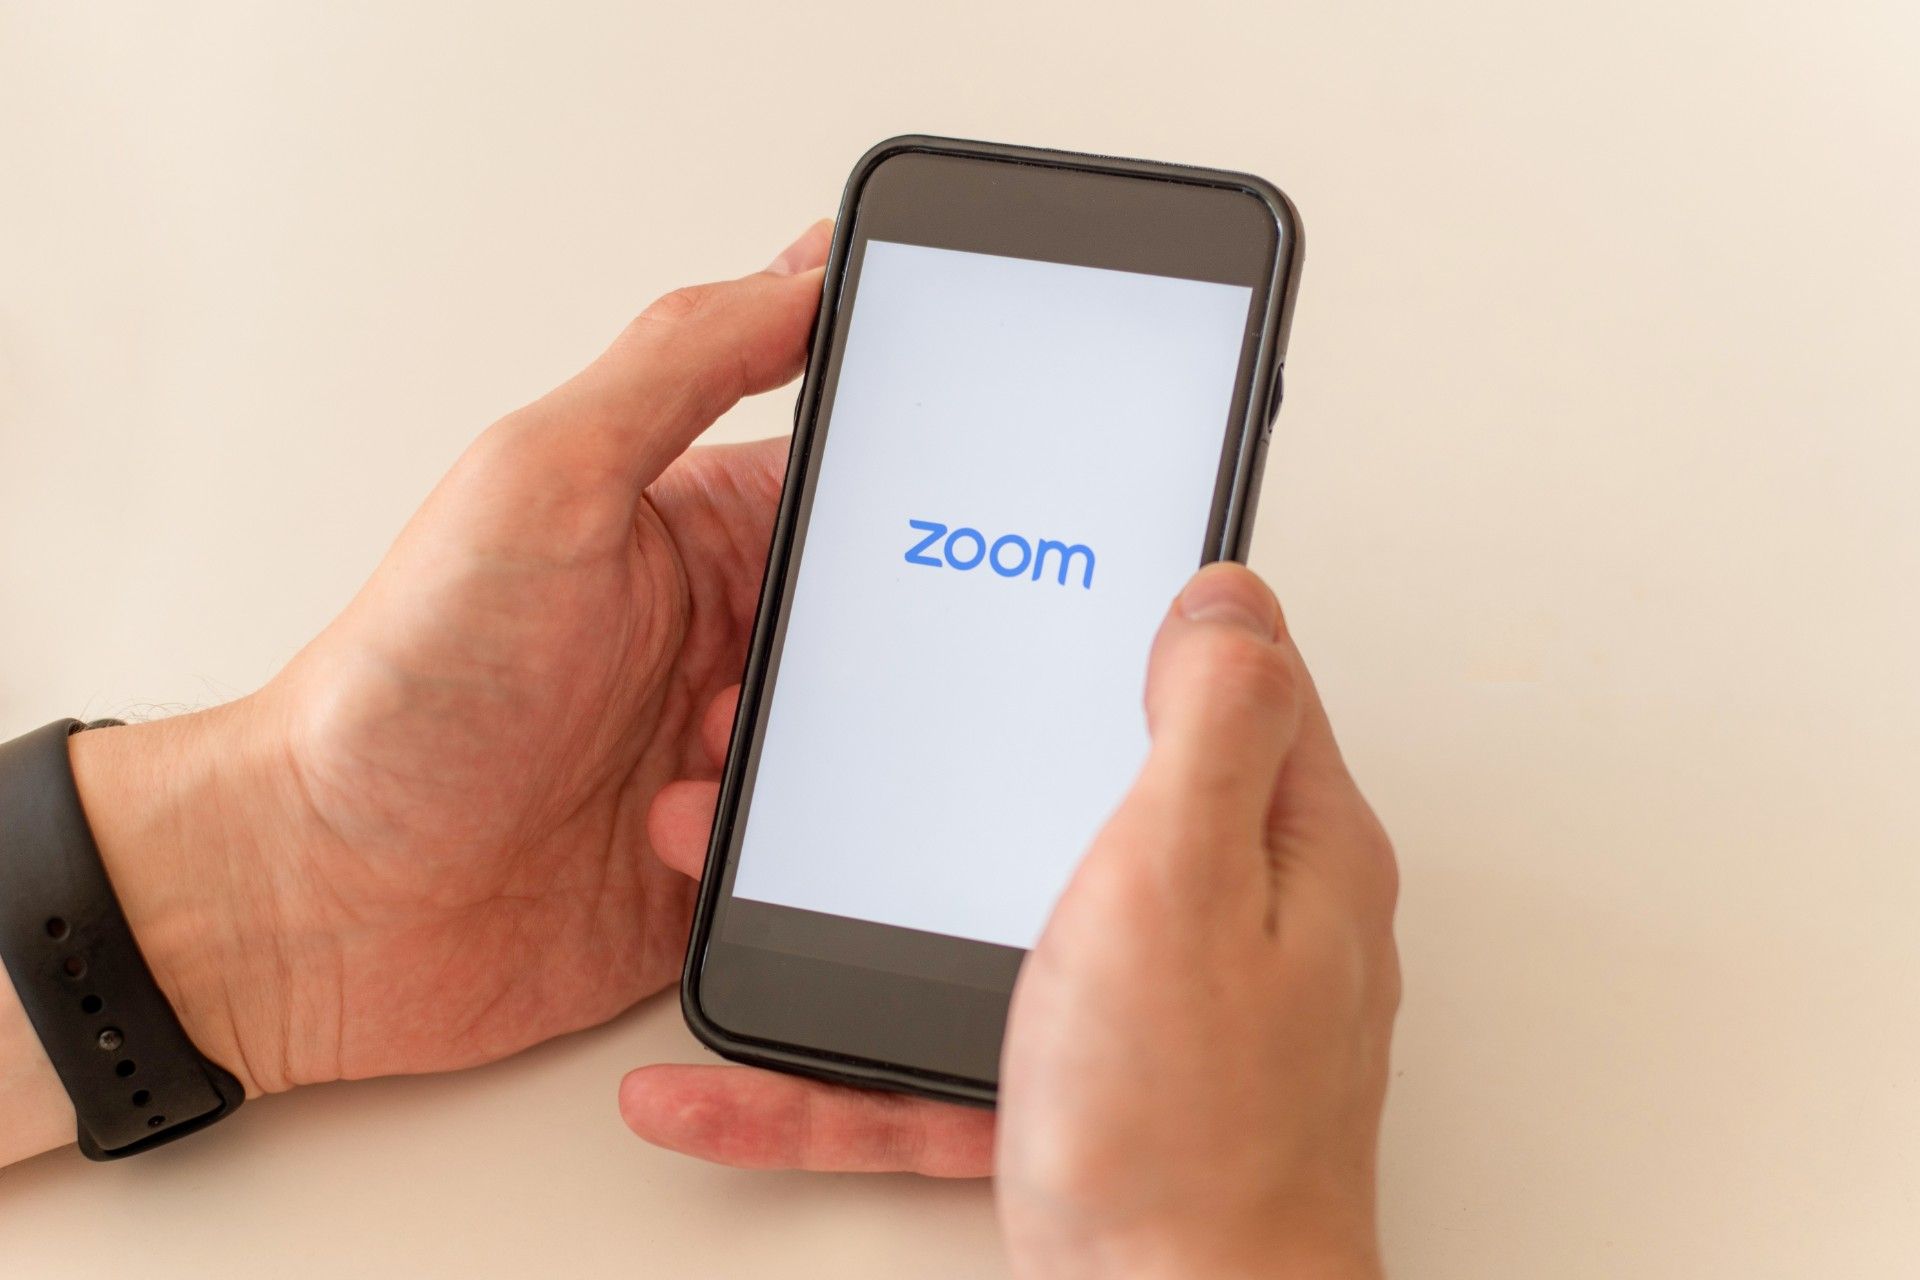 Zoom users allegedly had their personal information shared with companies such as Facebook.